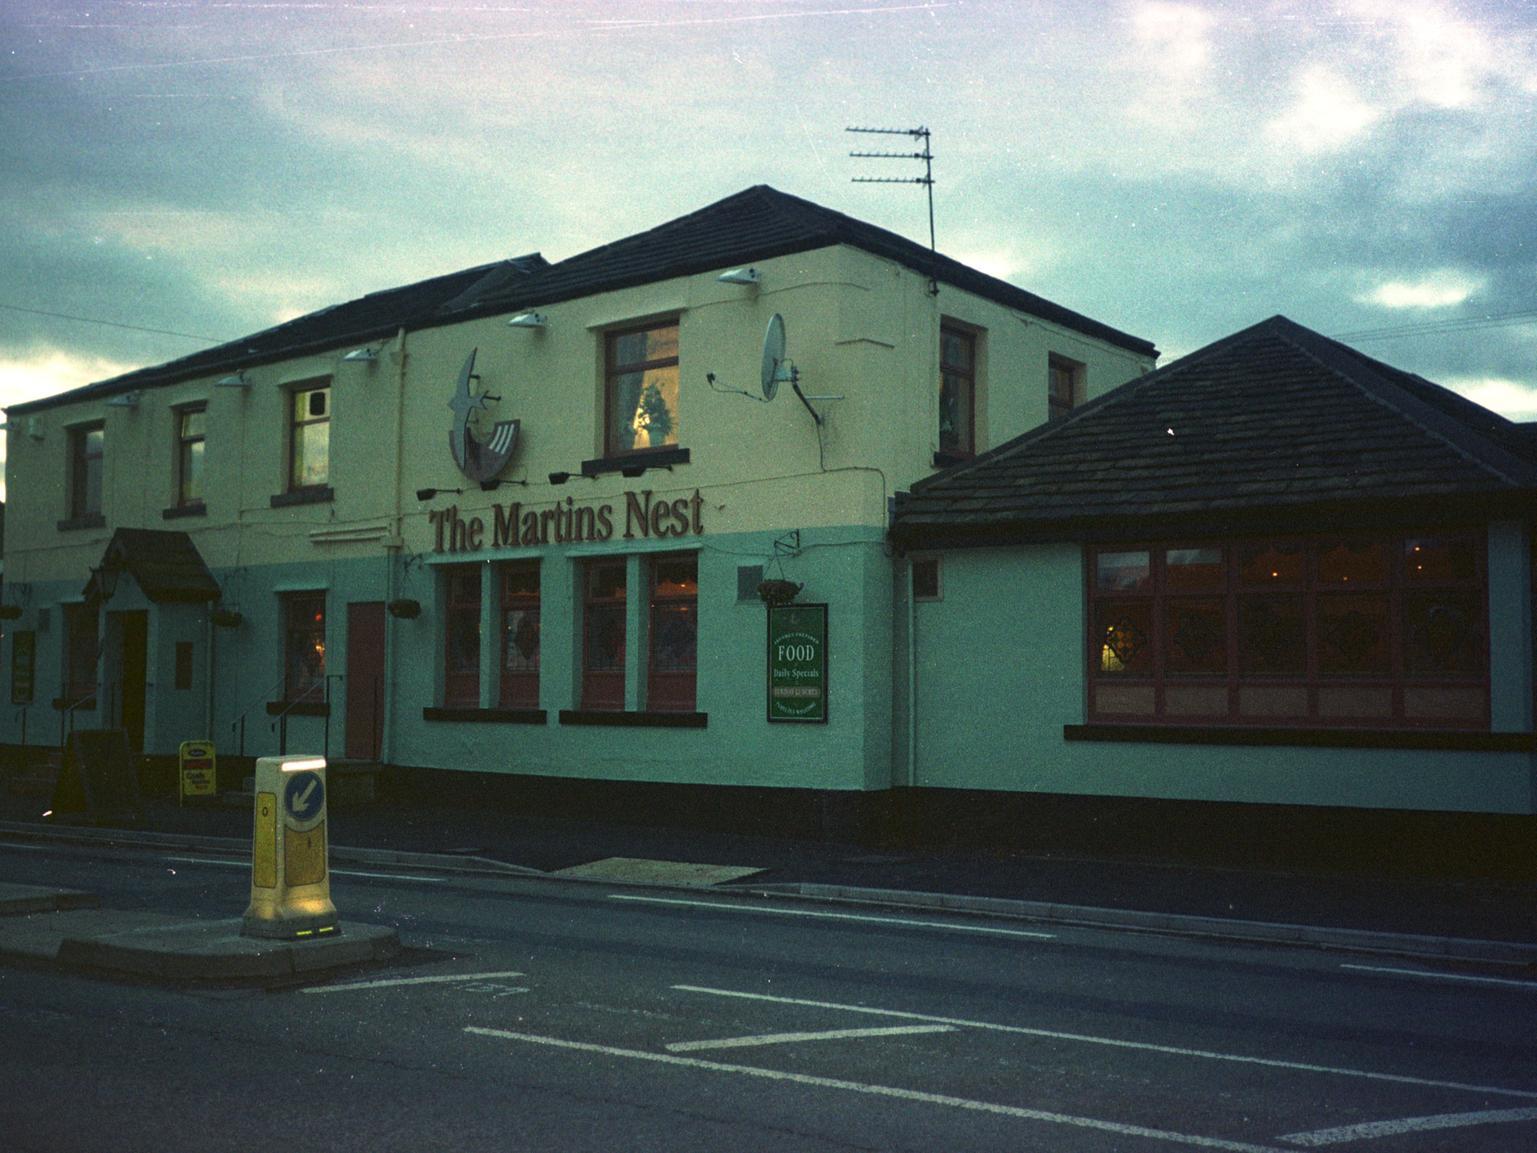 This Brighouse pub was built in 1825 on Bradford Road but closed in 2009. The building still stands and is home to Indian restaurant Thaal.